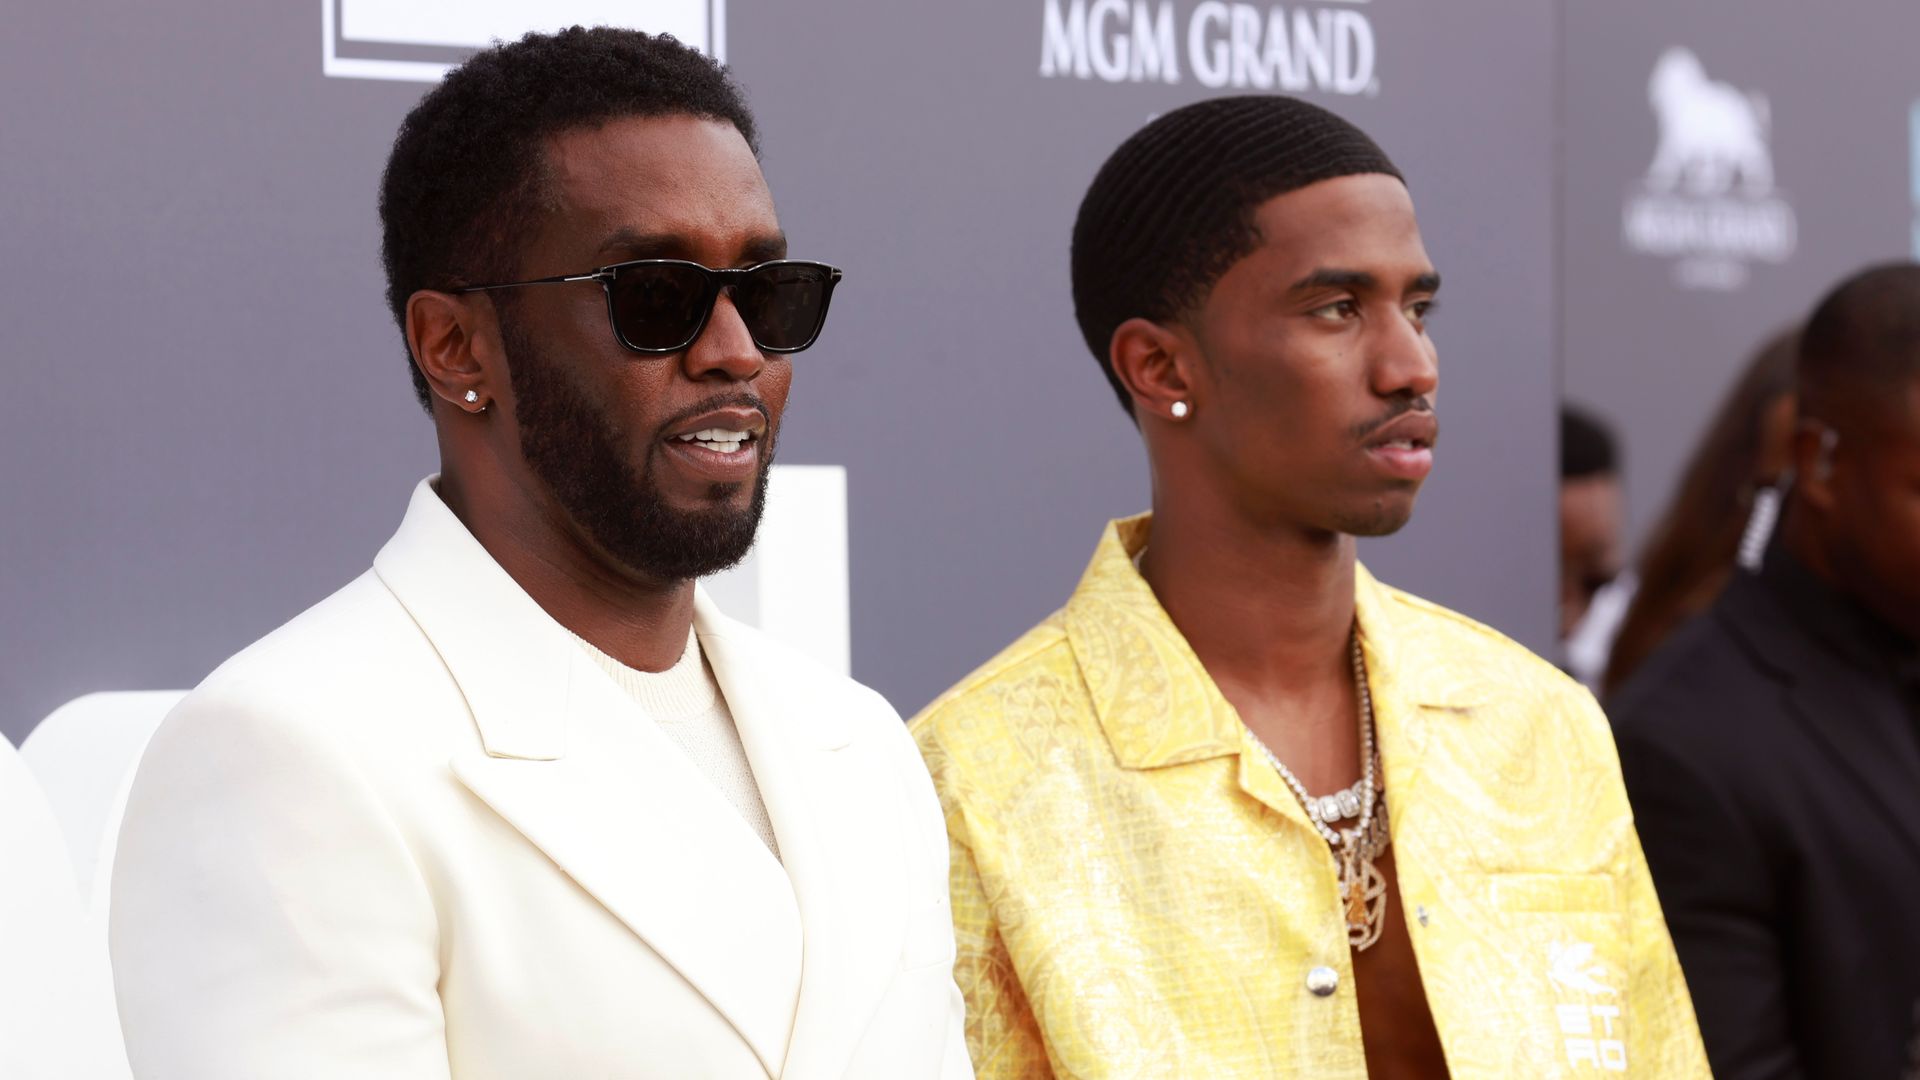 Sean 'Diddy' Combs' son accused of sexual assault in new lawsuit after being spotted in handcuffs at house raid